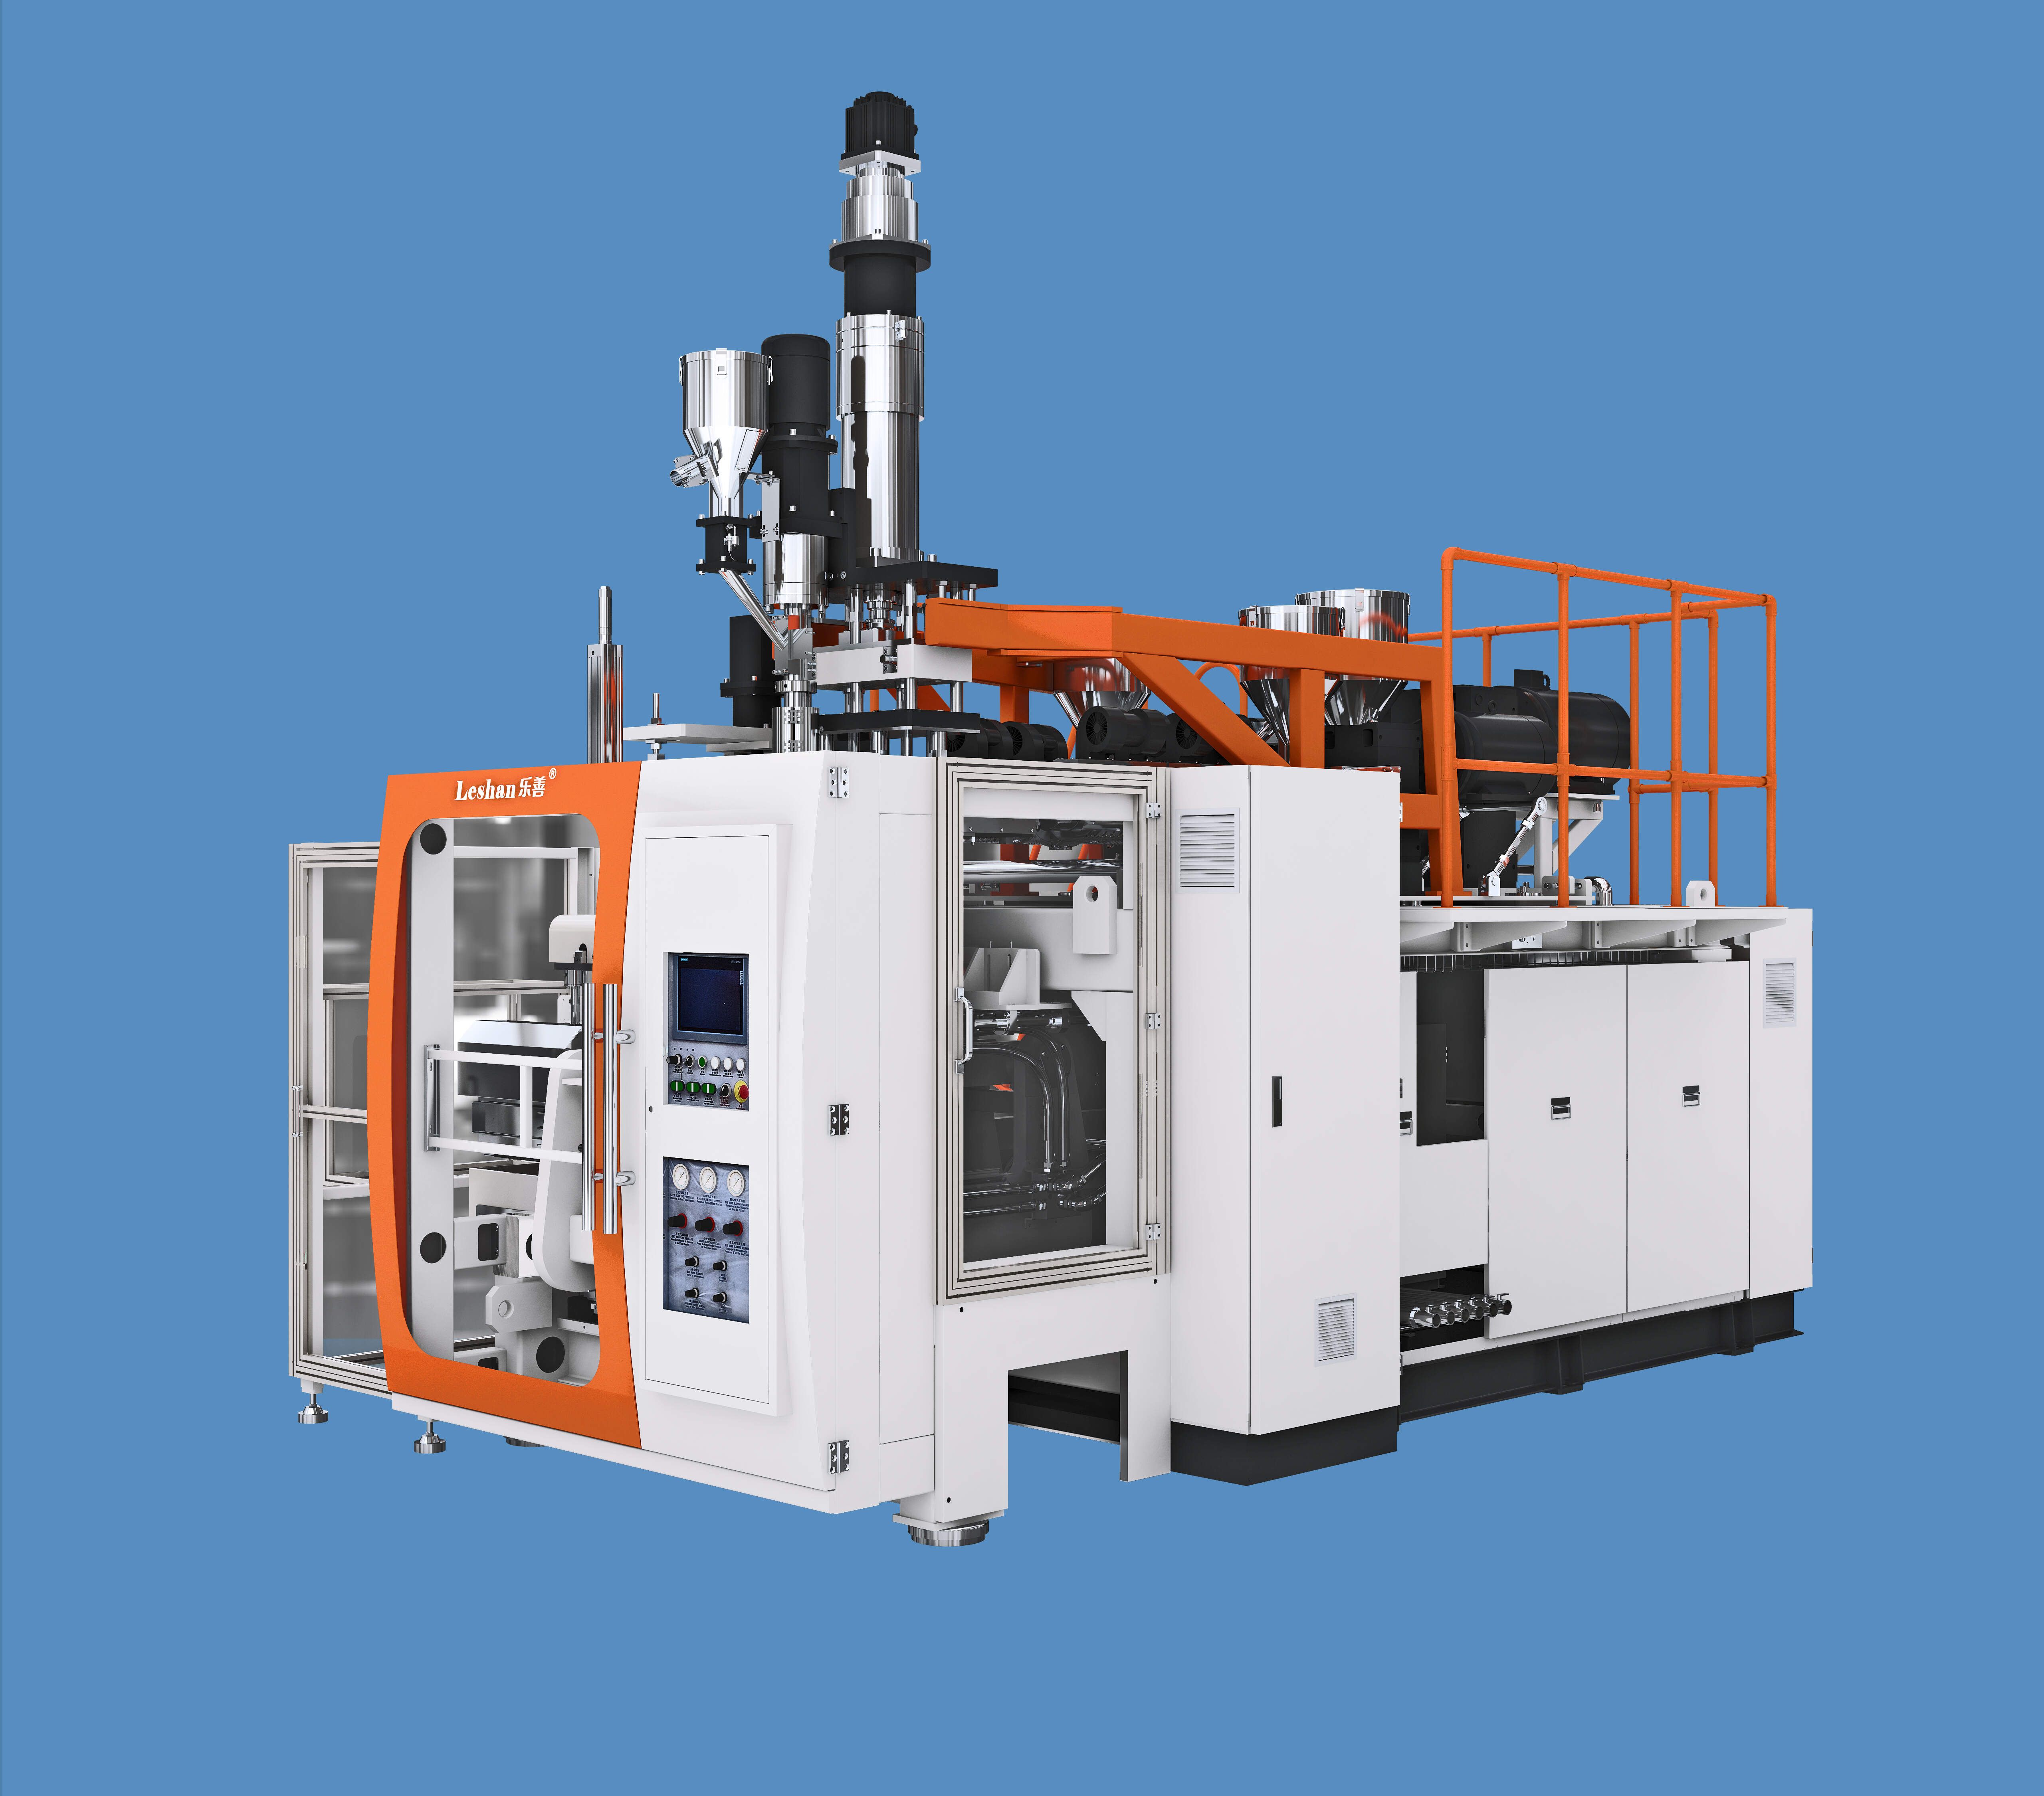 Besides the blow molding machine, what other services can Leshan provide?